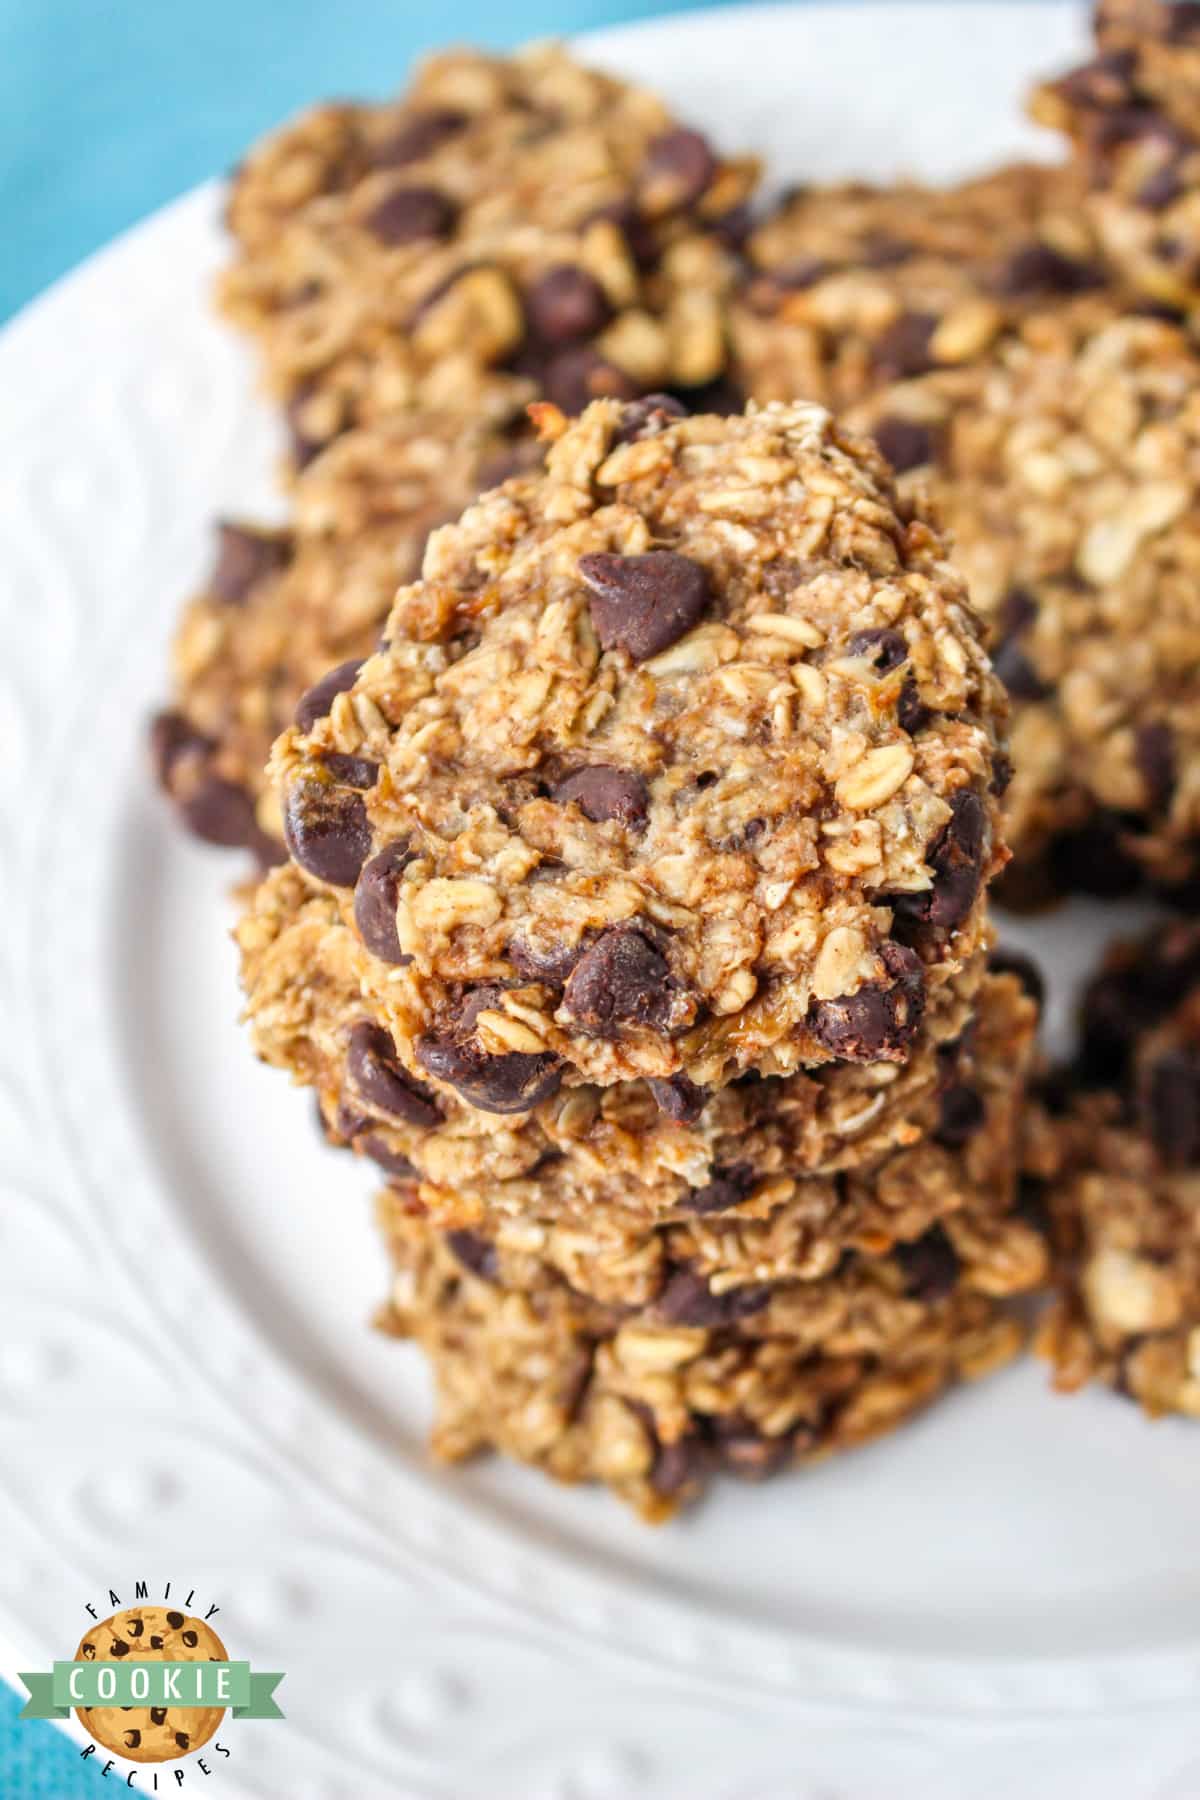 Healthy cookies made with oats and bananas